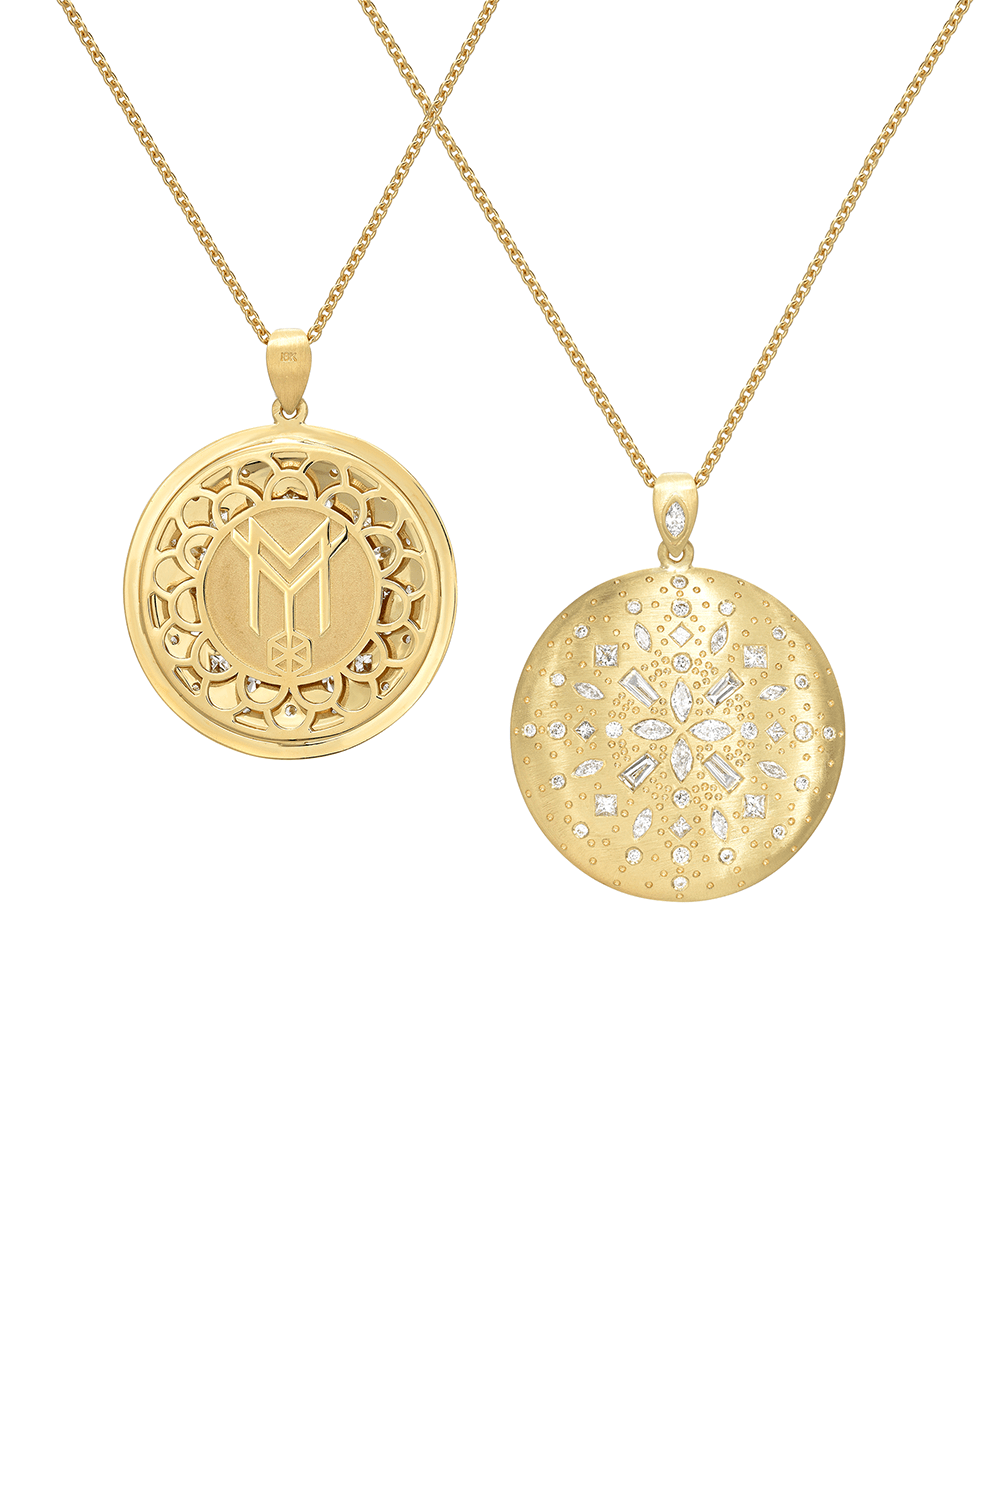 MEREDITH YOUNG-Diamond Chaos Medallion Necklace-YELLOW GOLD